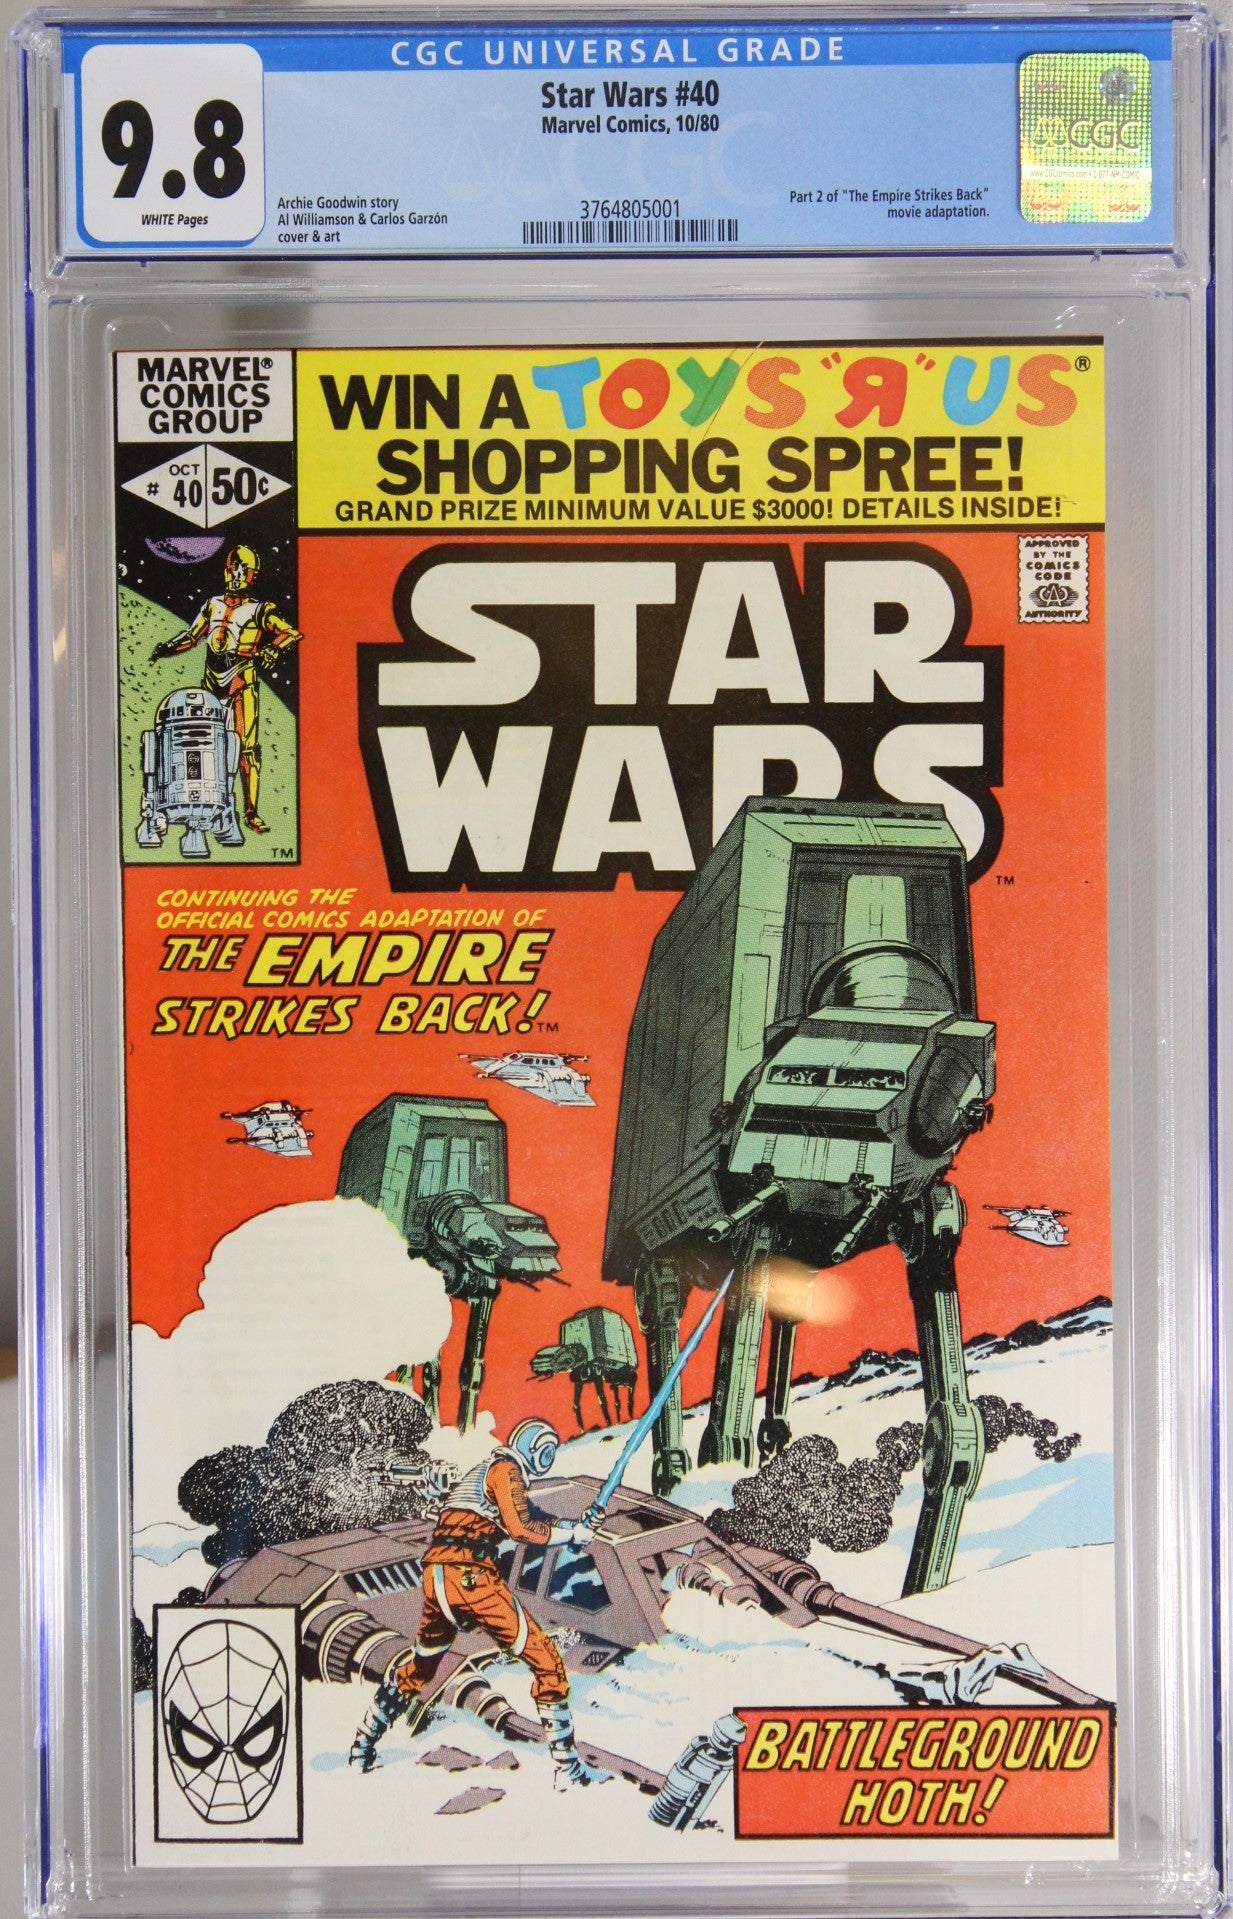 Star Wars #40 - CGC 9.8 - Part 2 of the "Empire Strikes Back" movie adaptation.